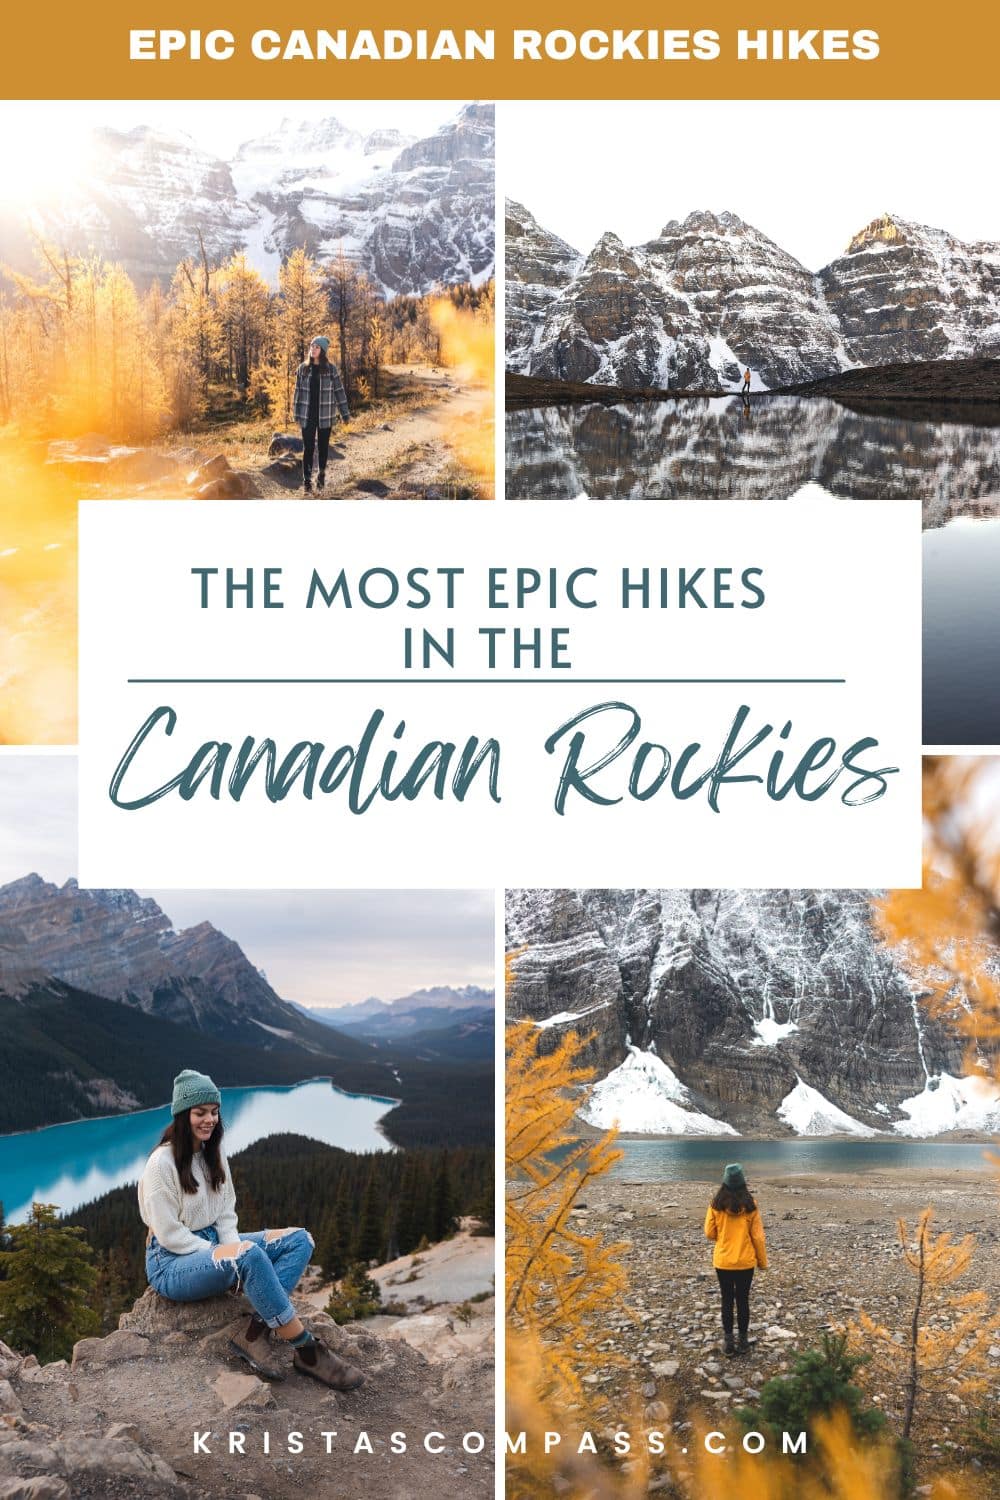 canadian rockies bucket list hikes you need to add to your canadian rockies road trip itinerary - best photos spots in the canadian rockies